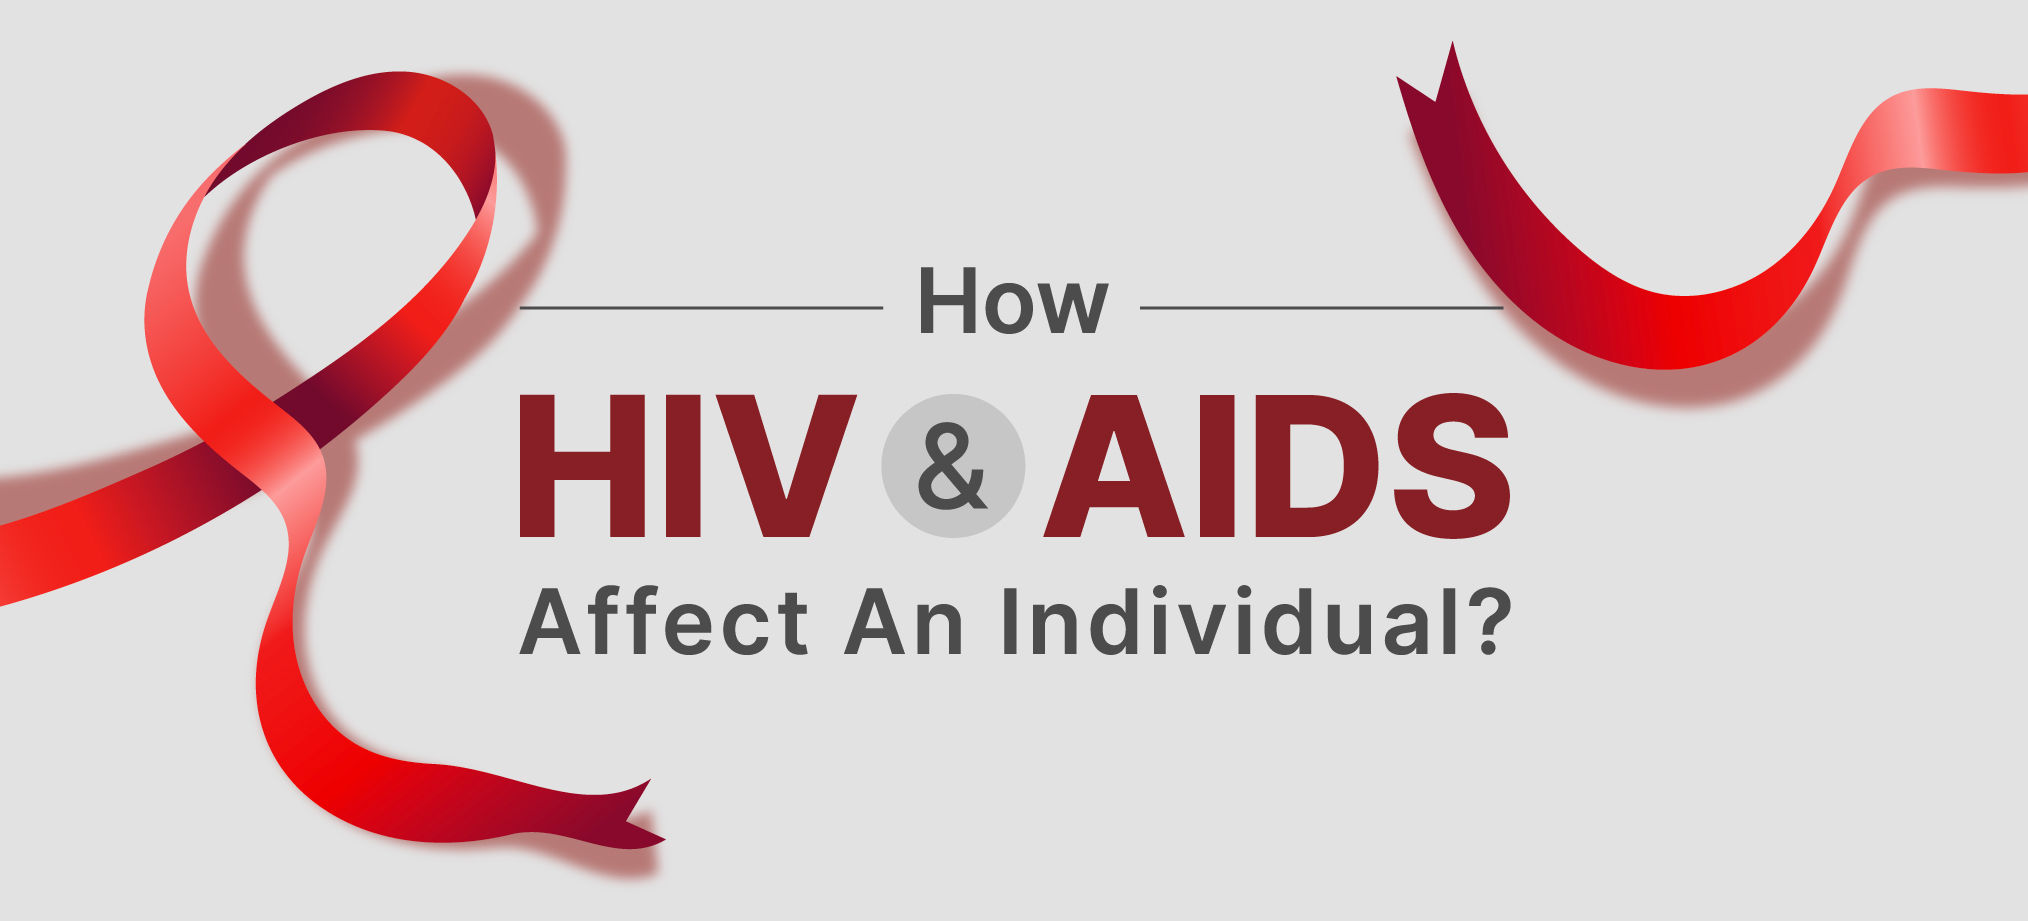 Can A Person With AIDS Lead A Normal Life?